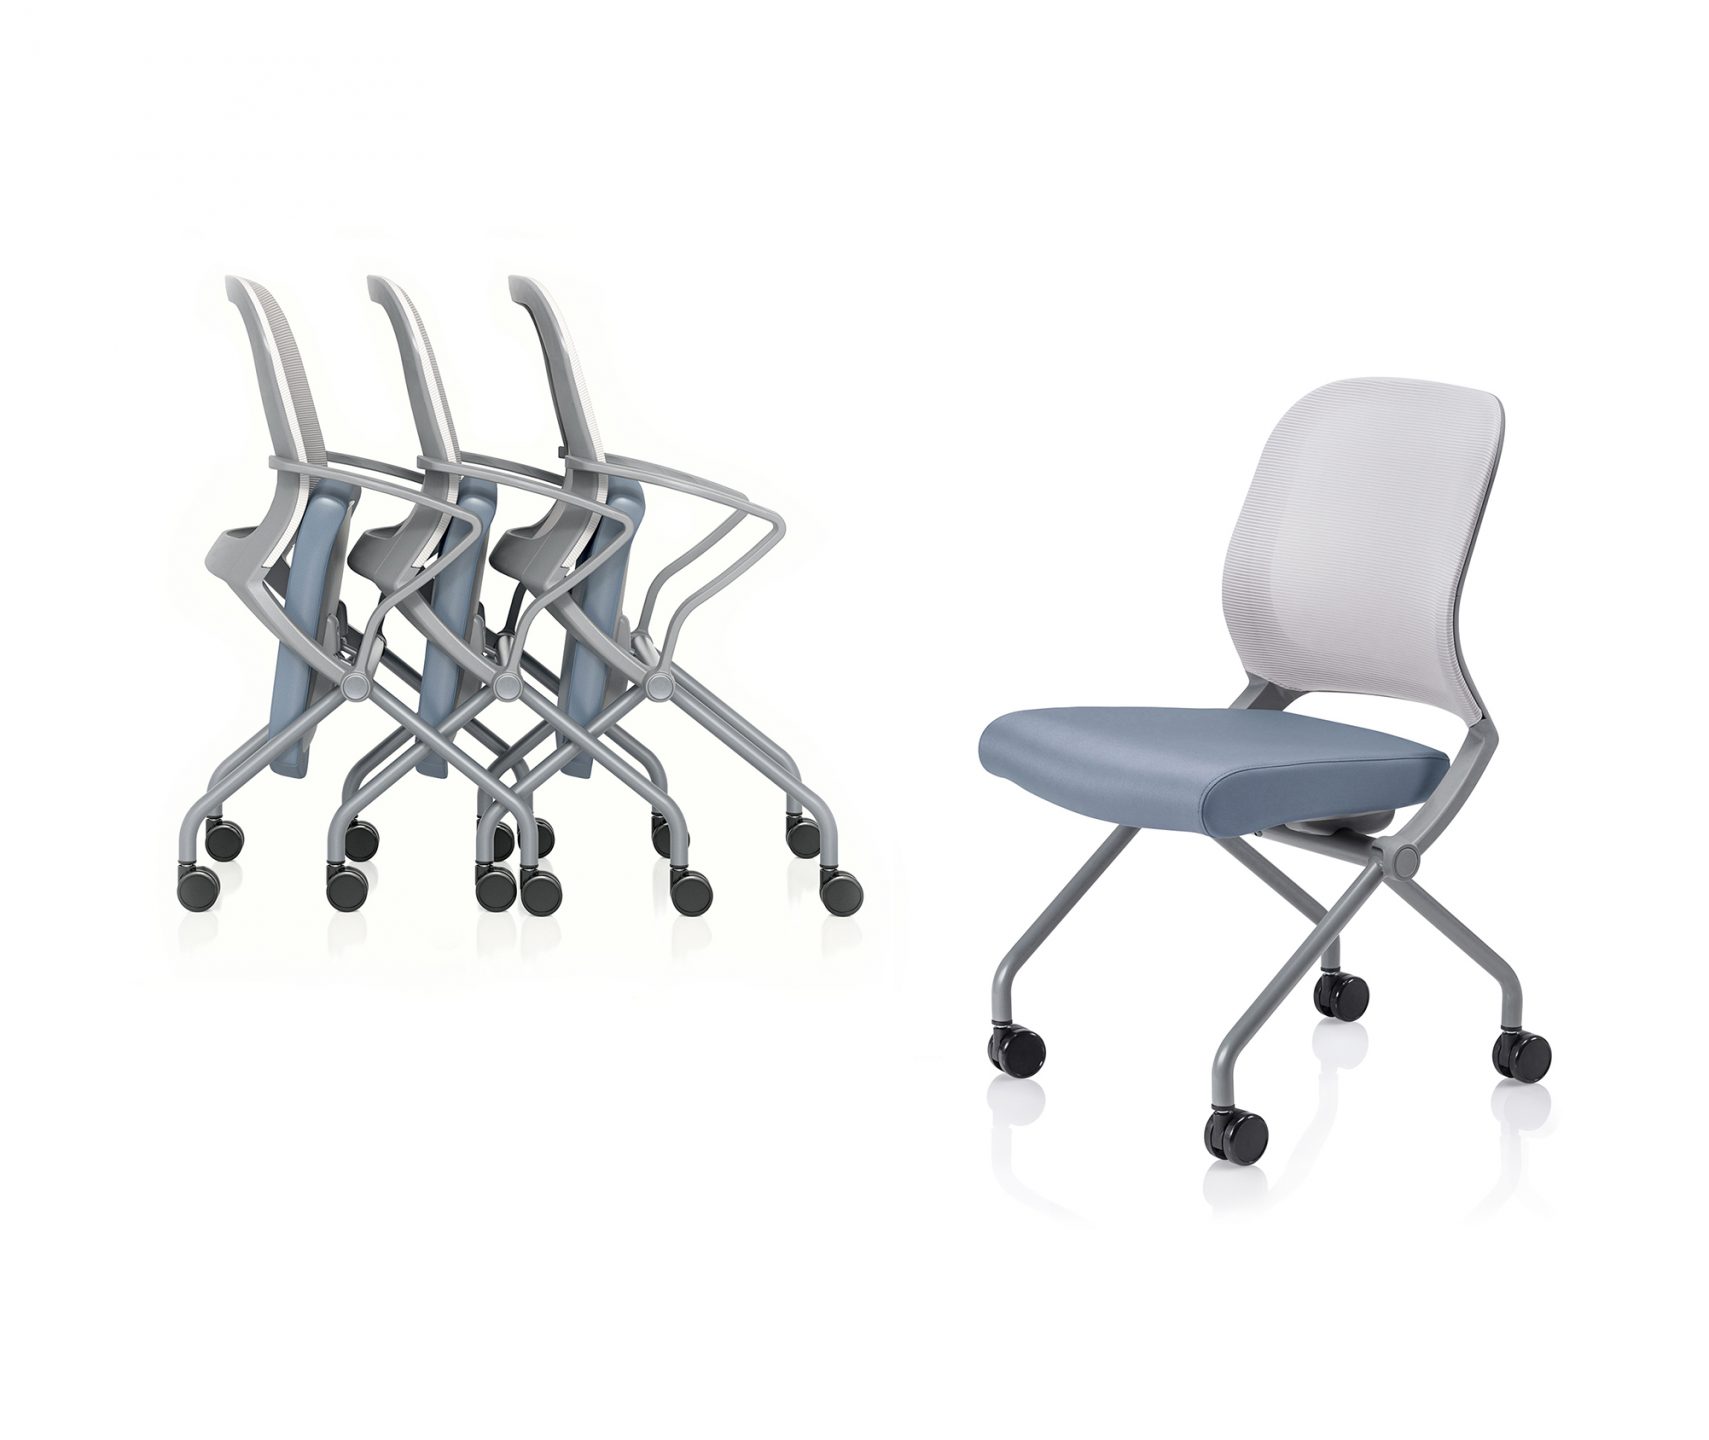 Groupe Lacasse_RACKUP Seating 1_int_products